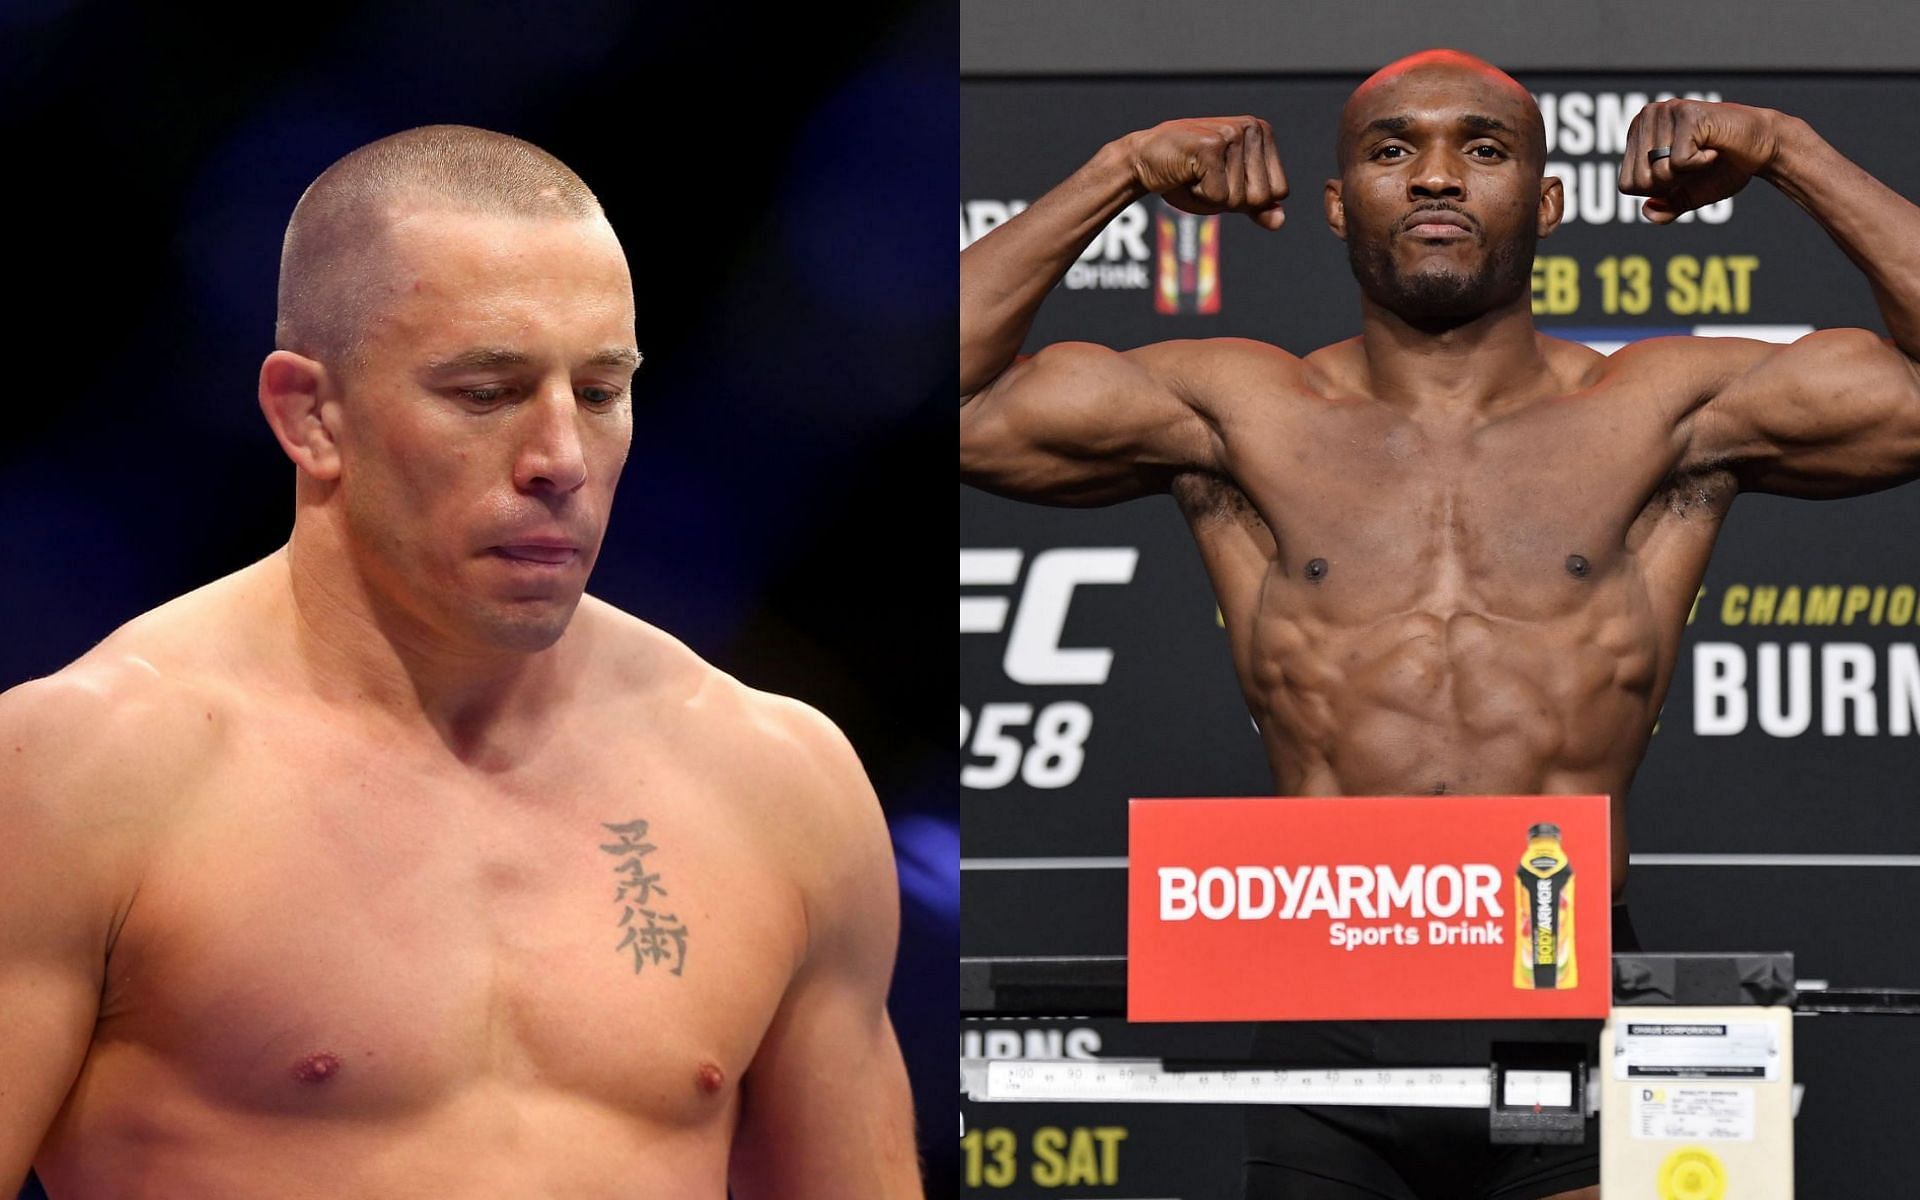 Luke Thomas offers up an interesting comparison between welterweight GOAT Georges St-Pierre and current champion Kamaru Usman